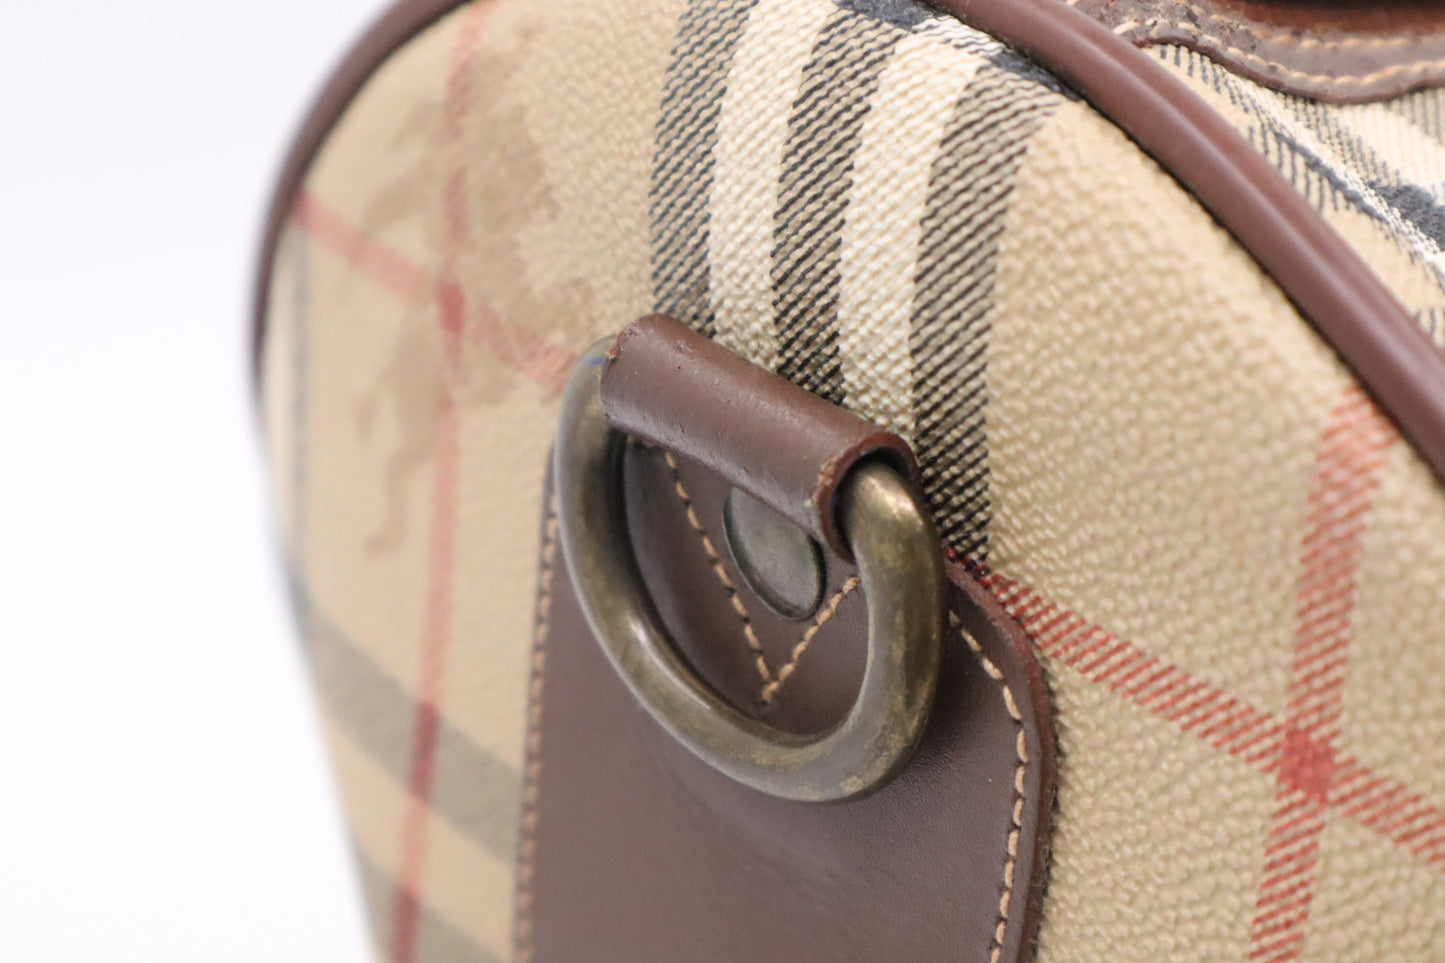 Burberry Travel Bag in Beige Check Coated Canvas